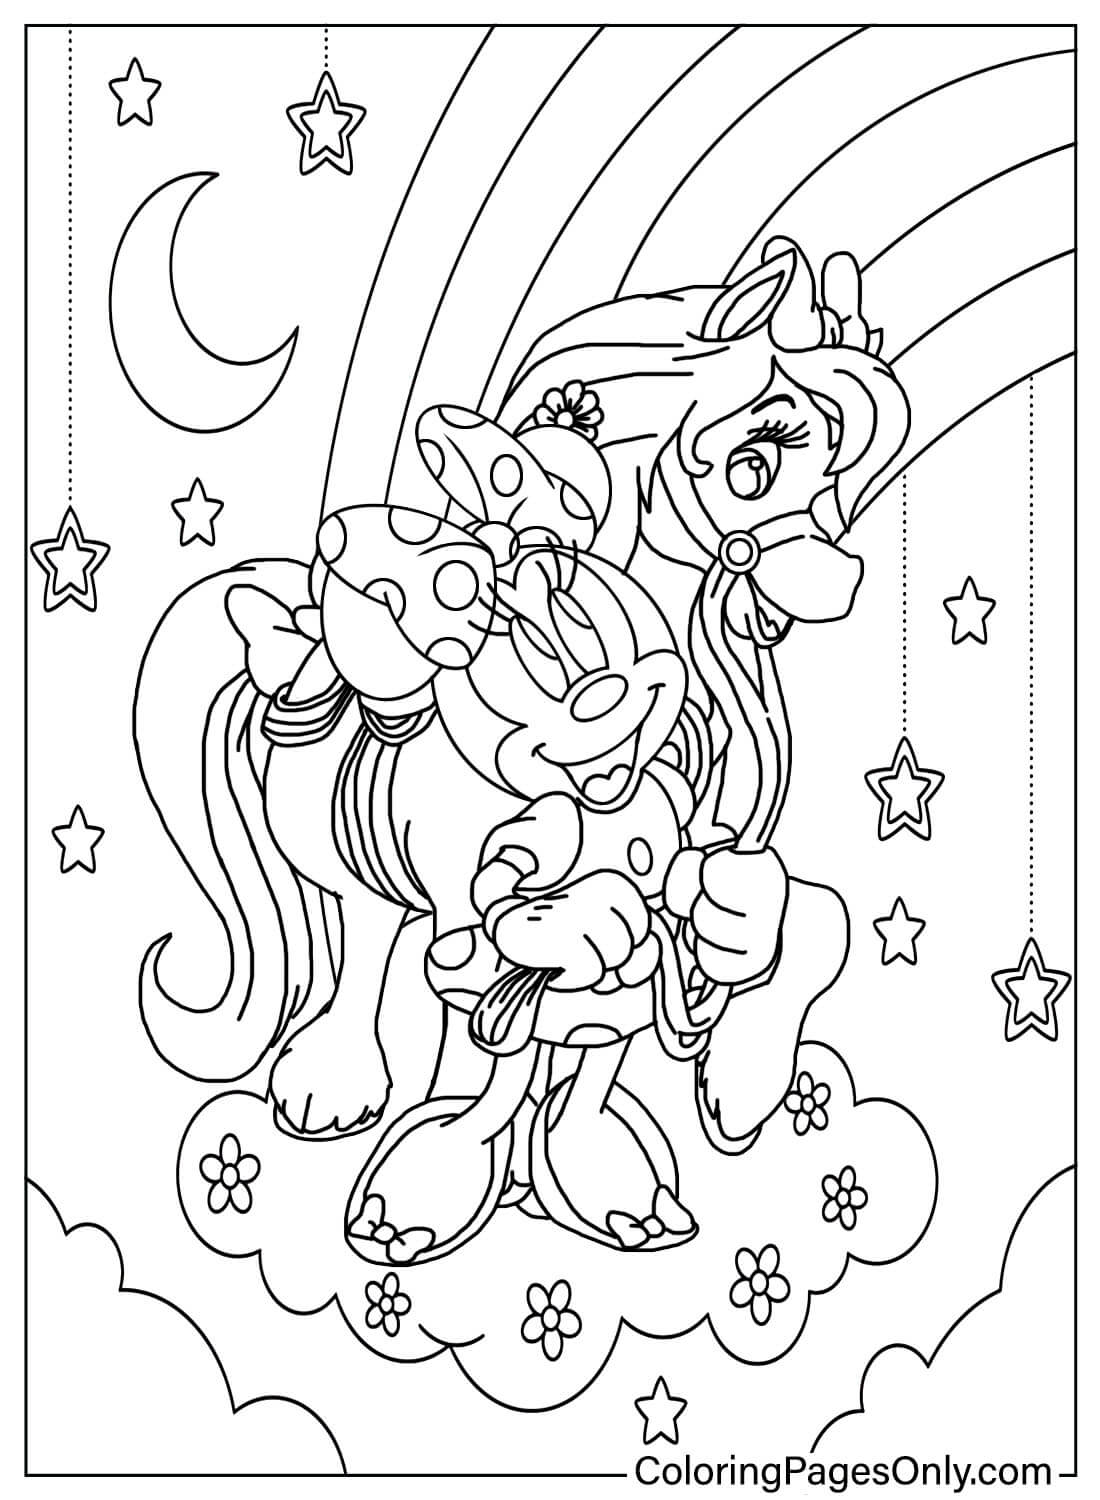 Minnie Mouse and Pony Coloring Page from Minnie Mouse